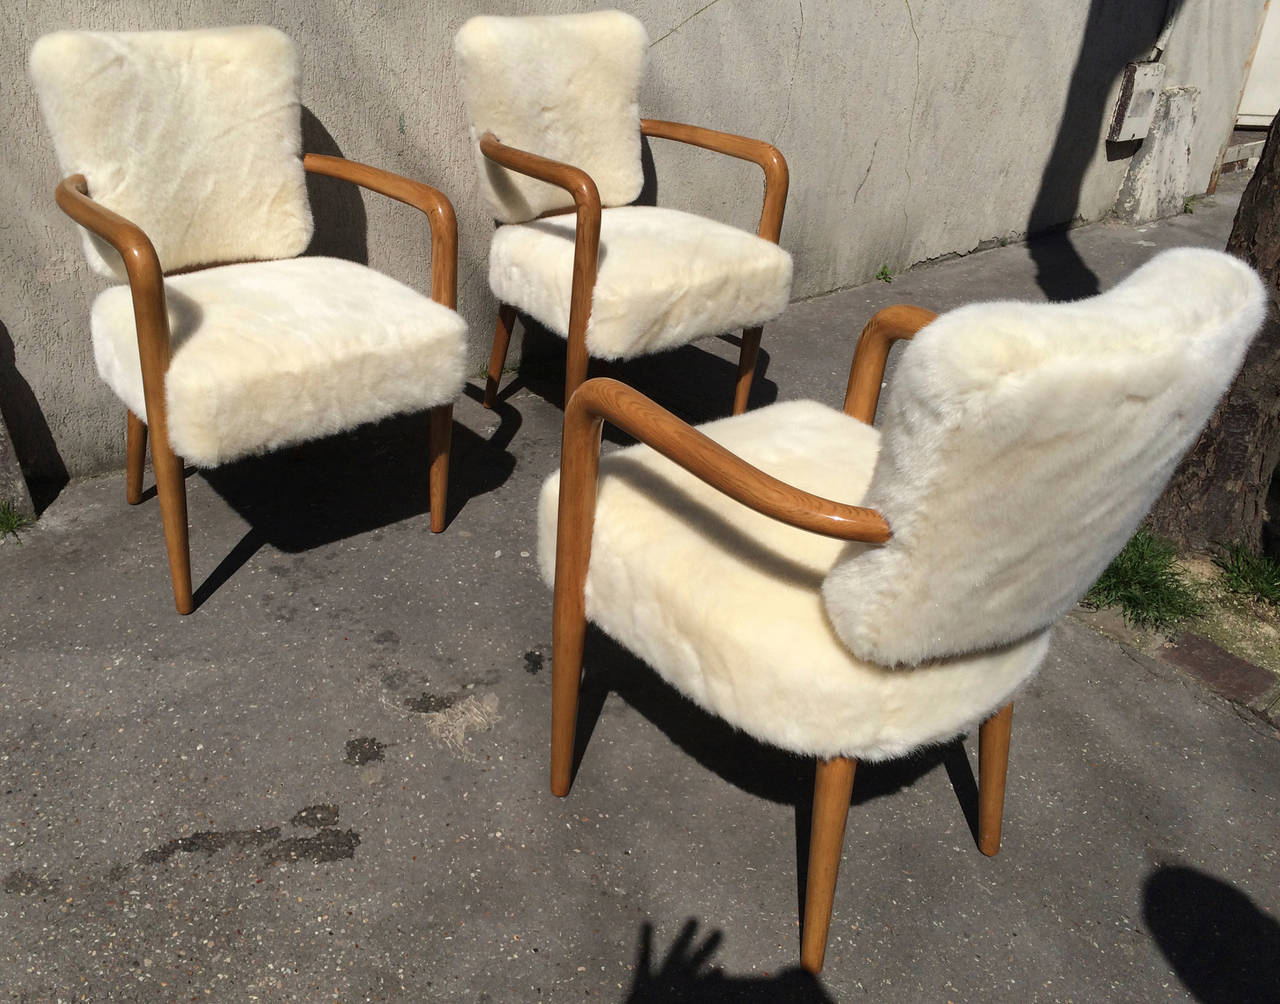 Renou et Genisset documented rare set of three desk chairs newly covered in faux fur cloth.